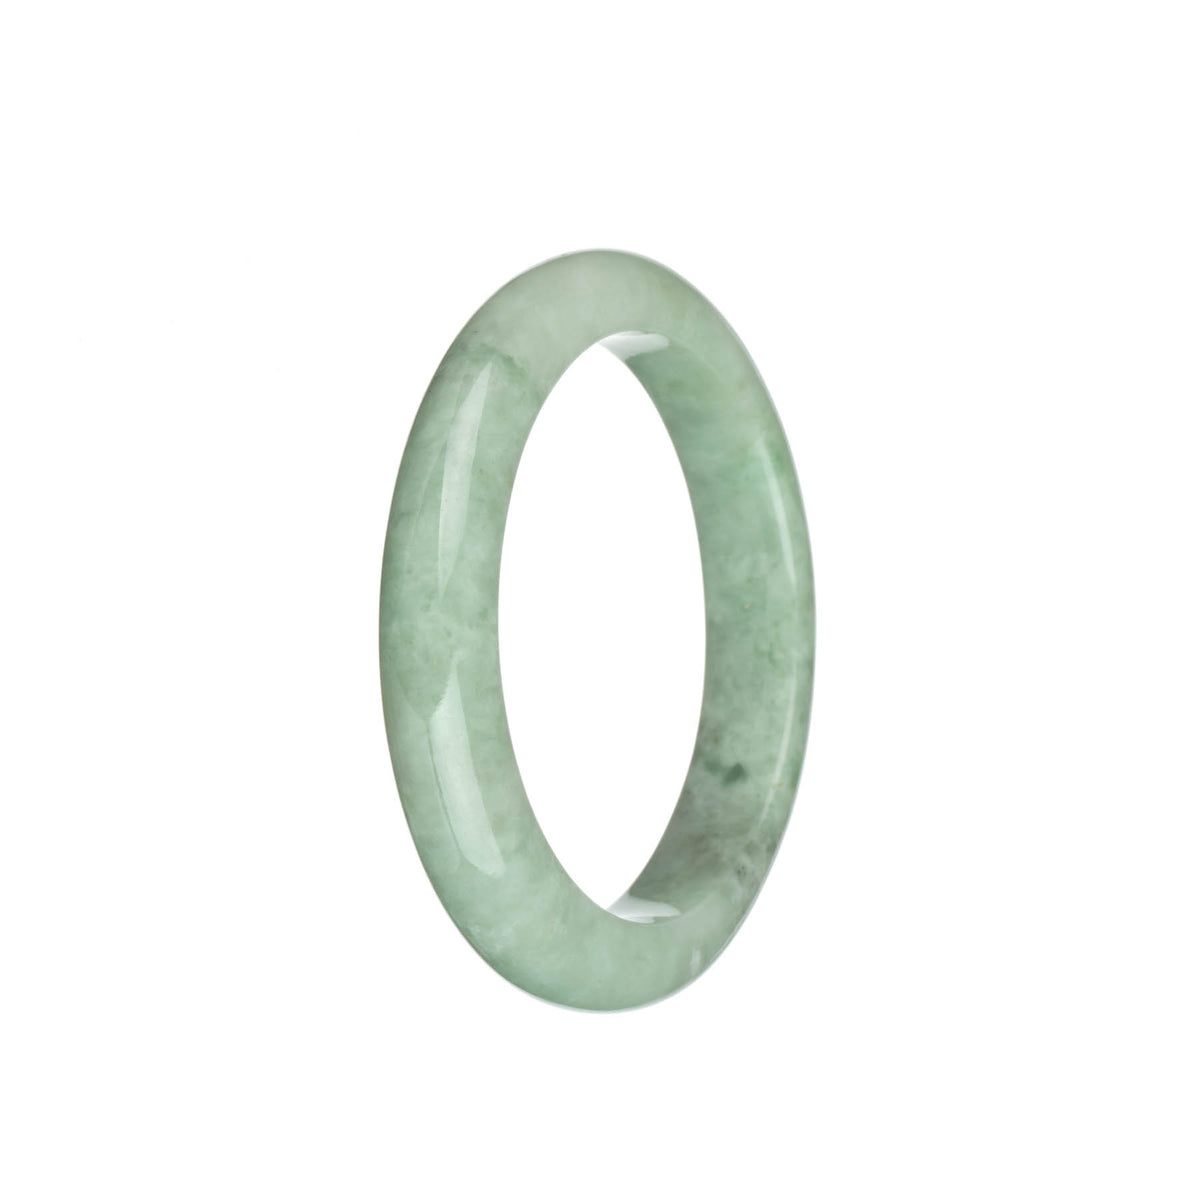 Genuine Grade A Light Green with Grey Patch Traditional Jade Bracelet - 56mm Half Moon